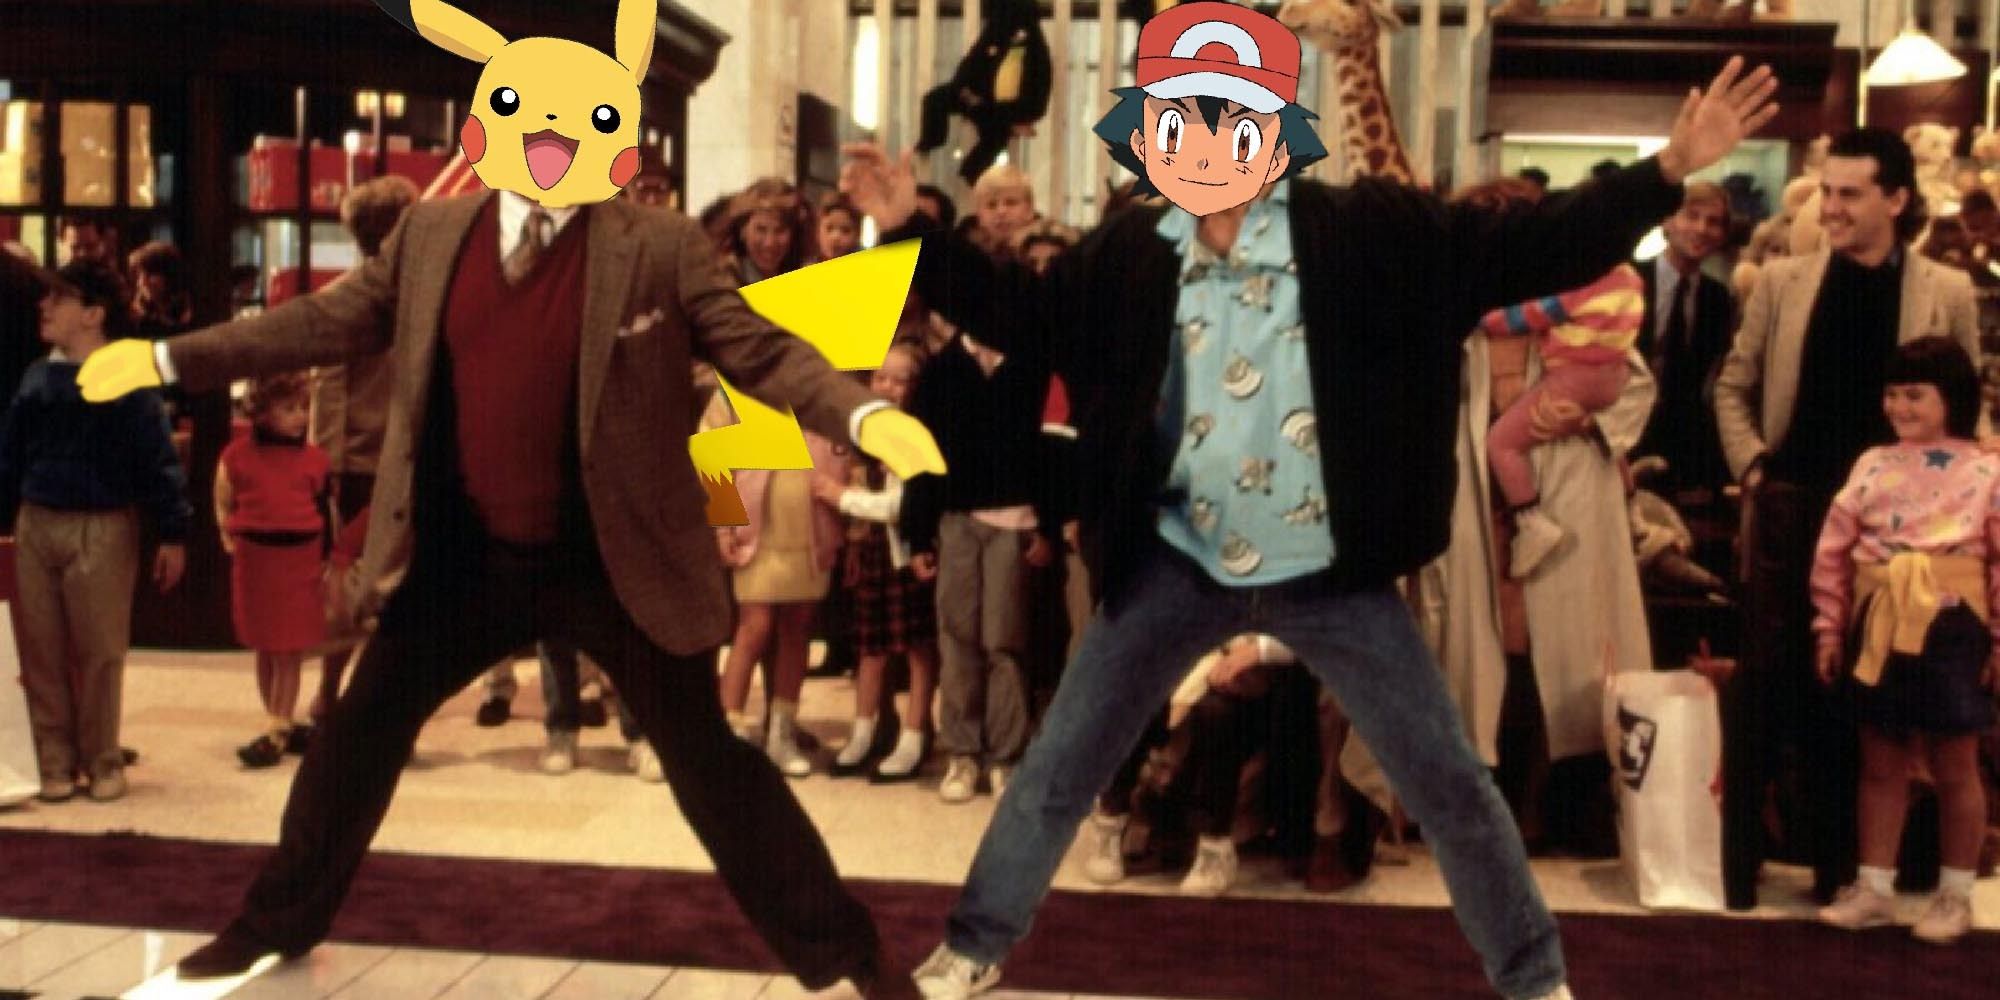 Screenshot from Big with Ash and Pikachu heads on the bodies of two men dancing on a keyboard in a toy store.